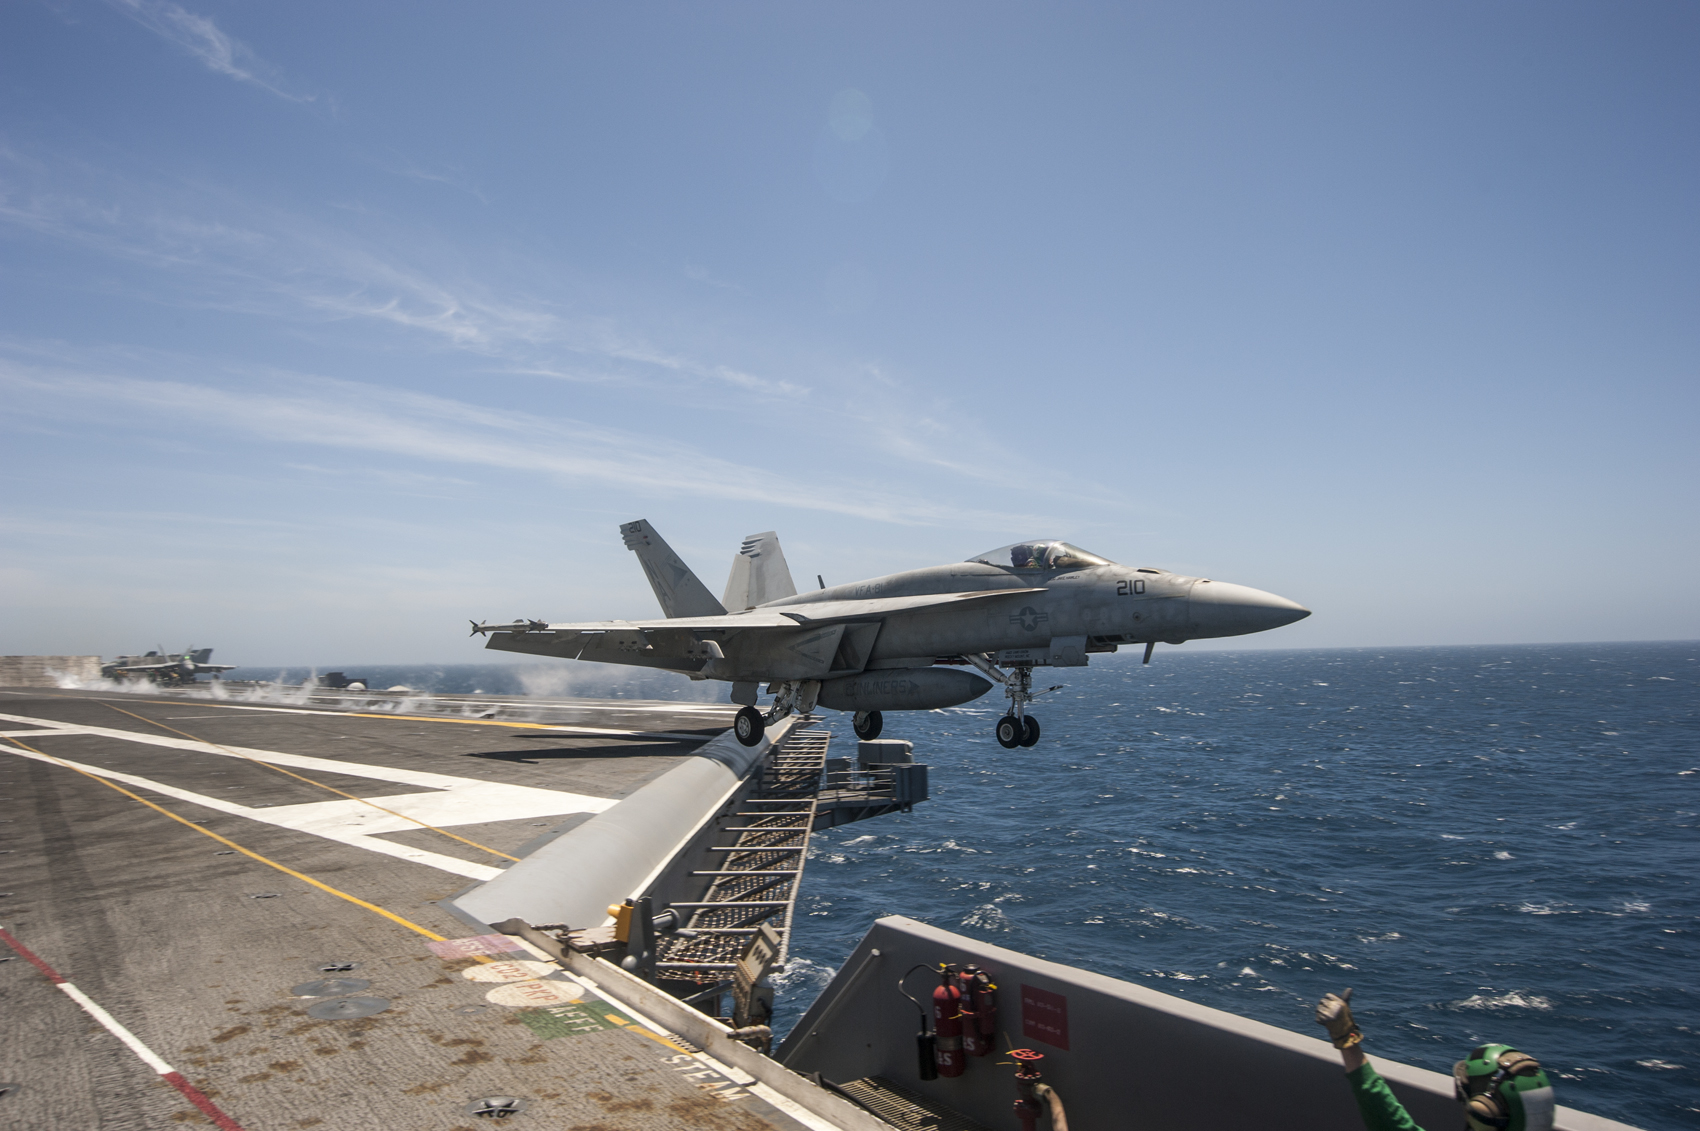 This is an image of an F/A-18E Super Hornet launching from a flight deck.